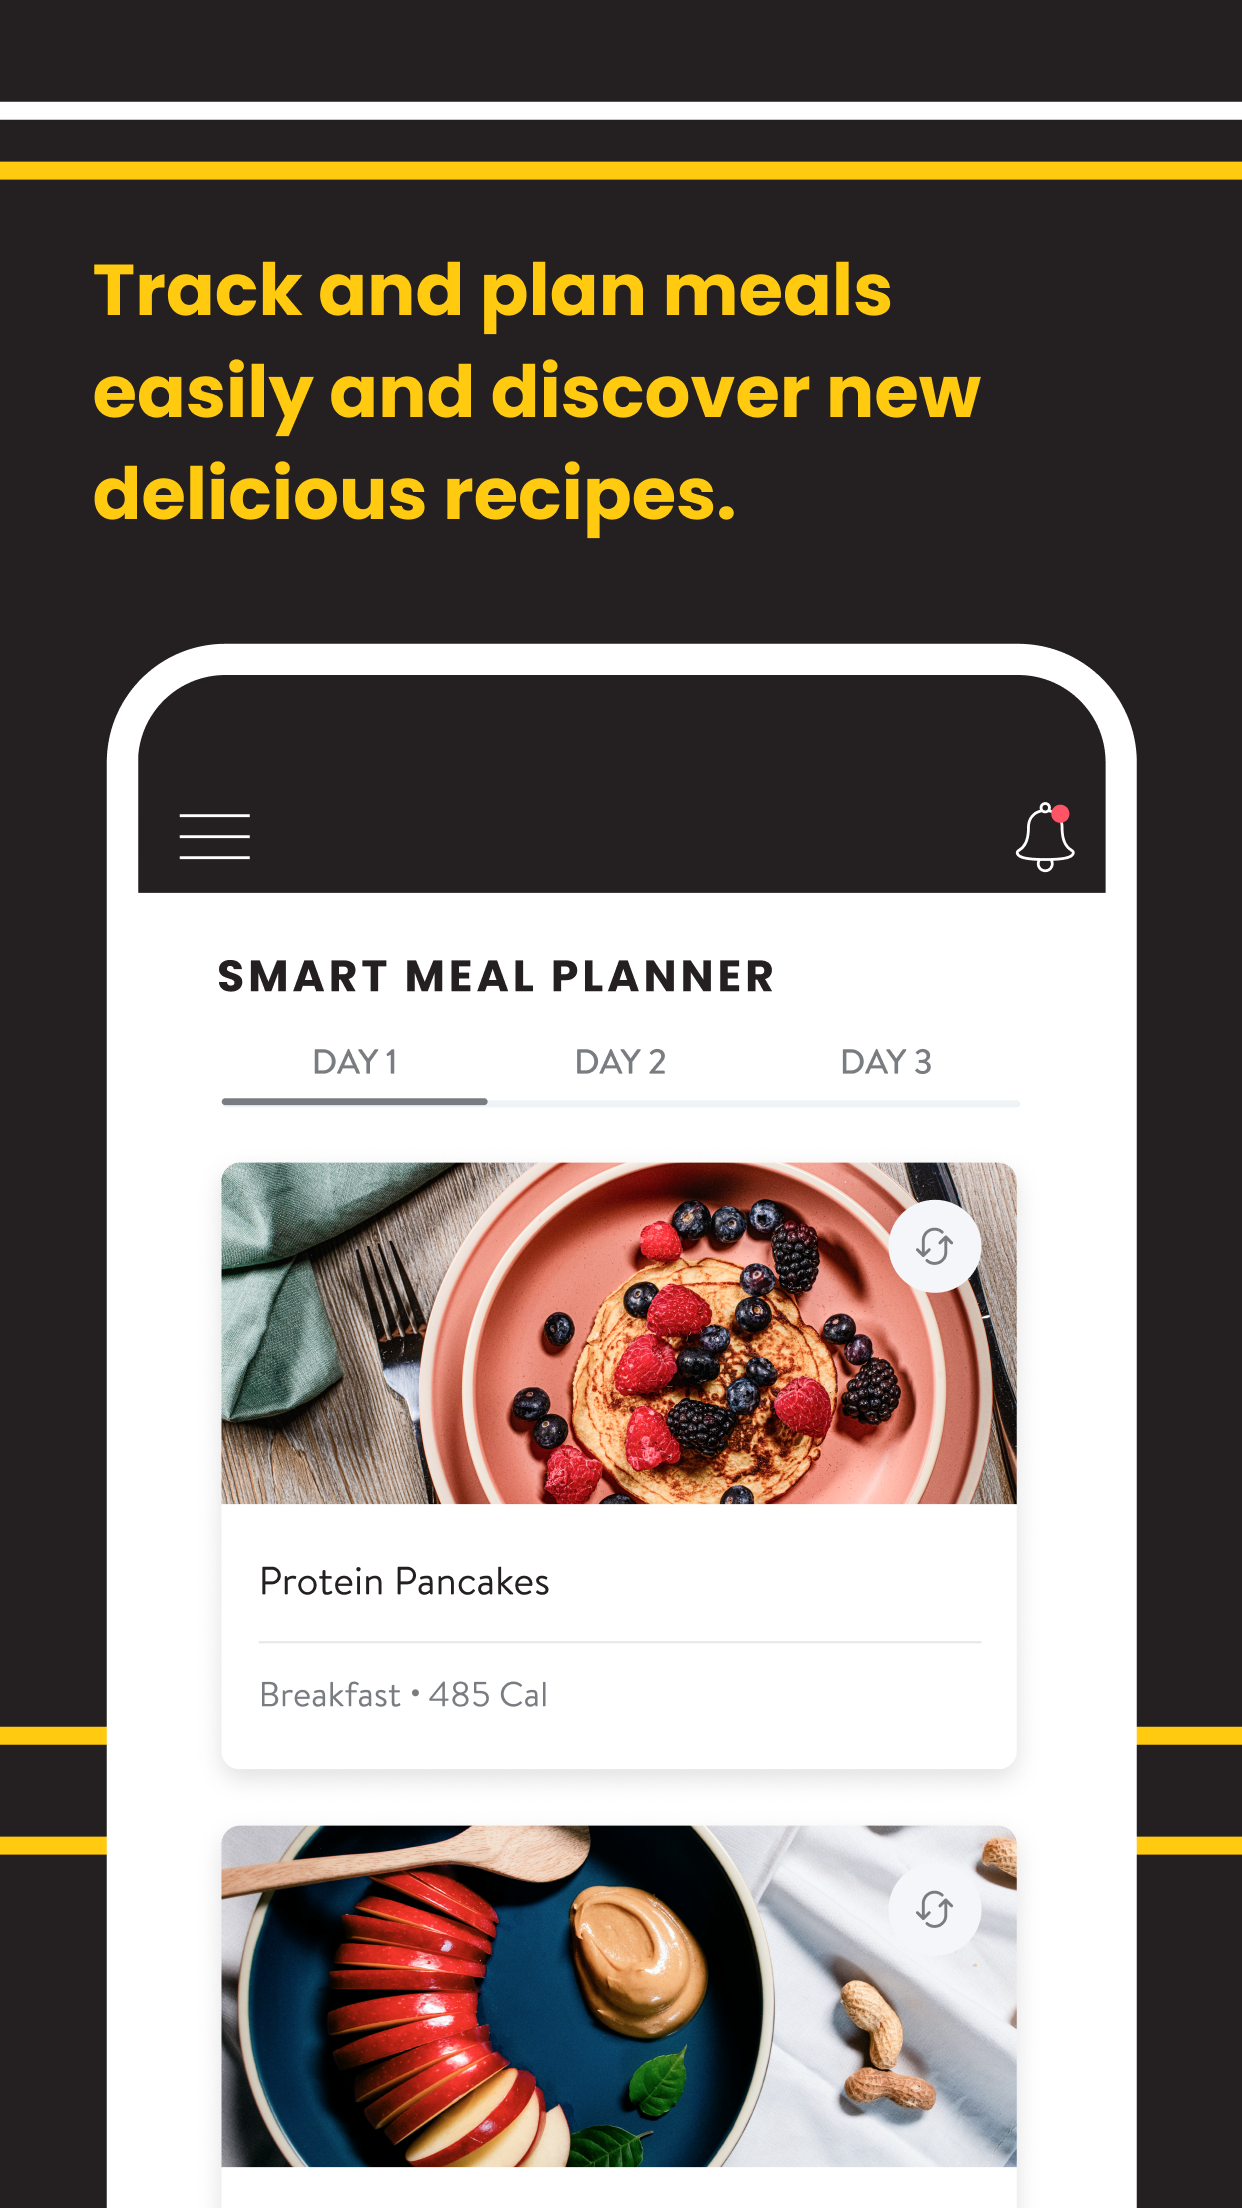 How does a client connect MyFitnessPal to Trainerize? – ABC